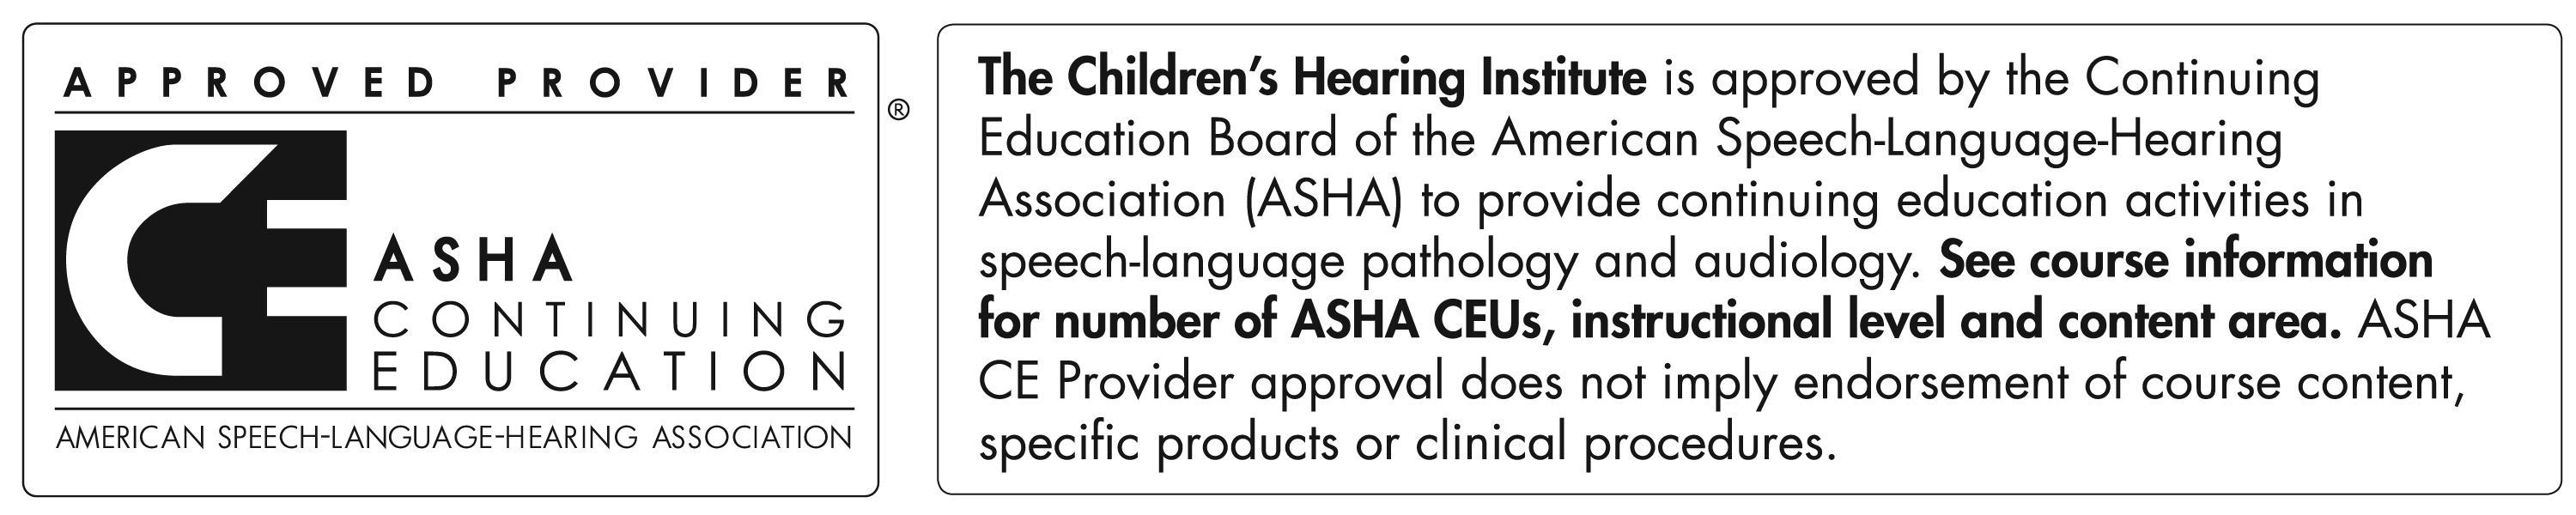 Annual Pediatric Audiology Conference Children's Hearing Institute